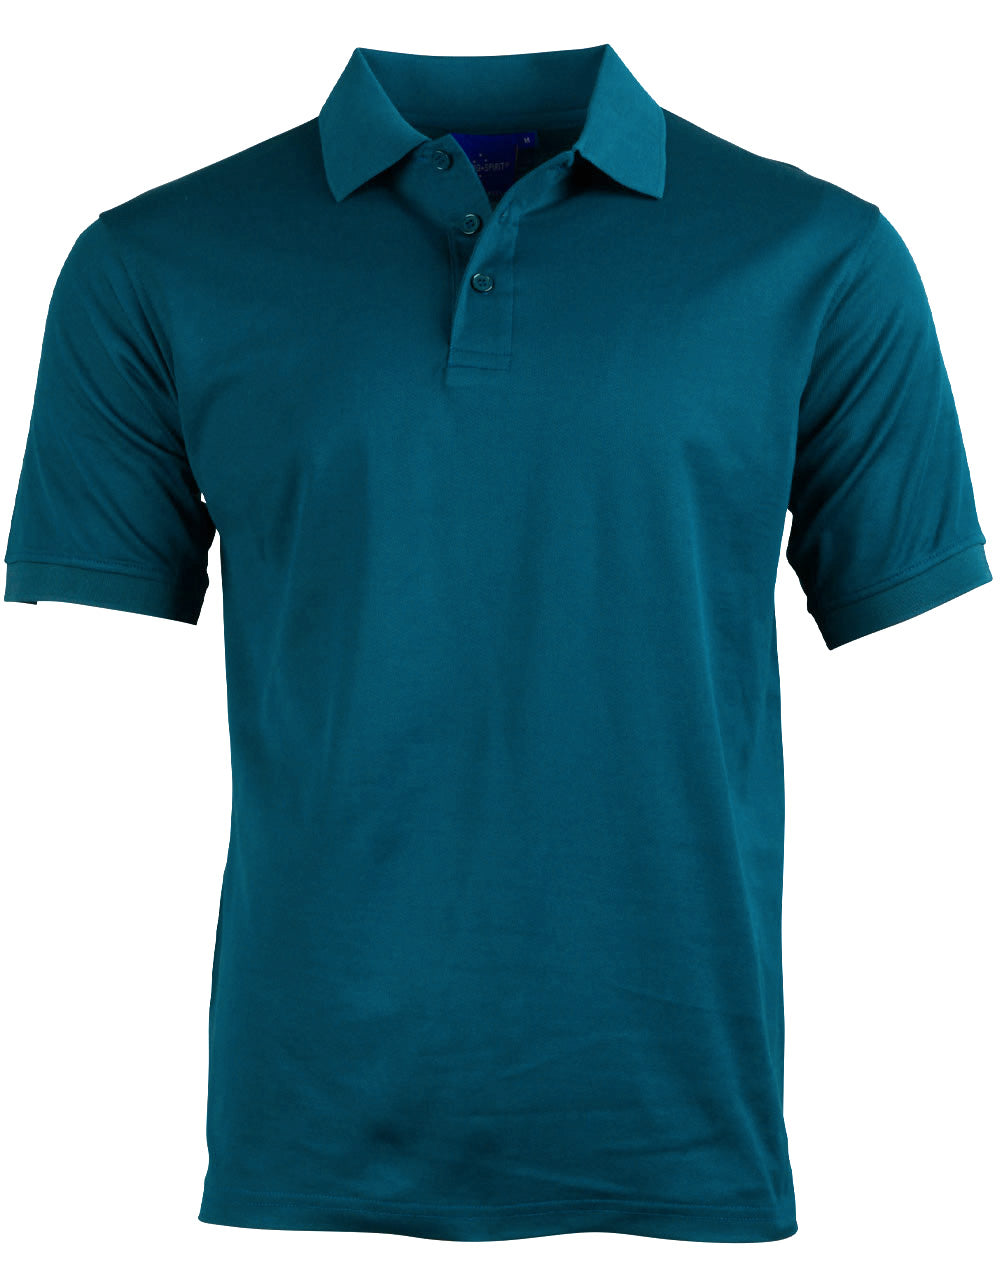 PS33 VICTORY POLO Men's